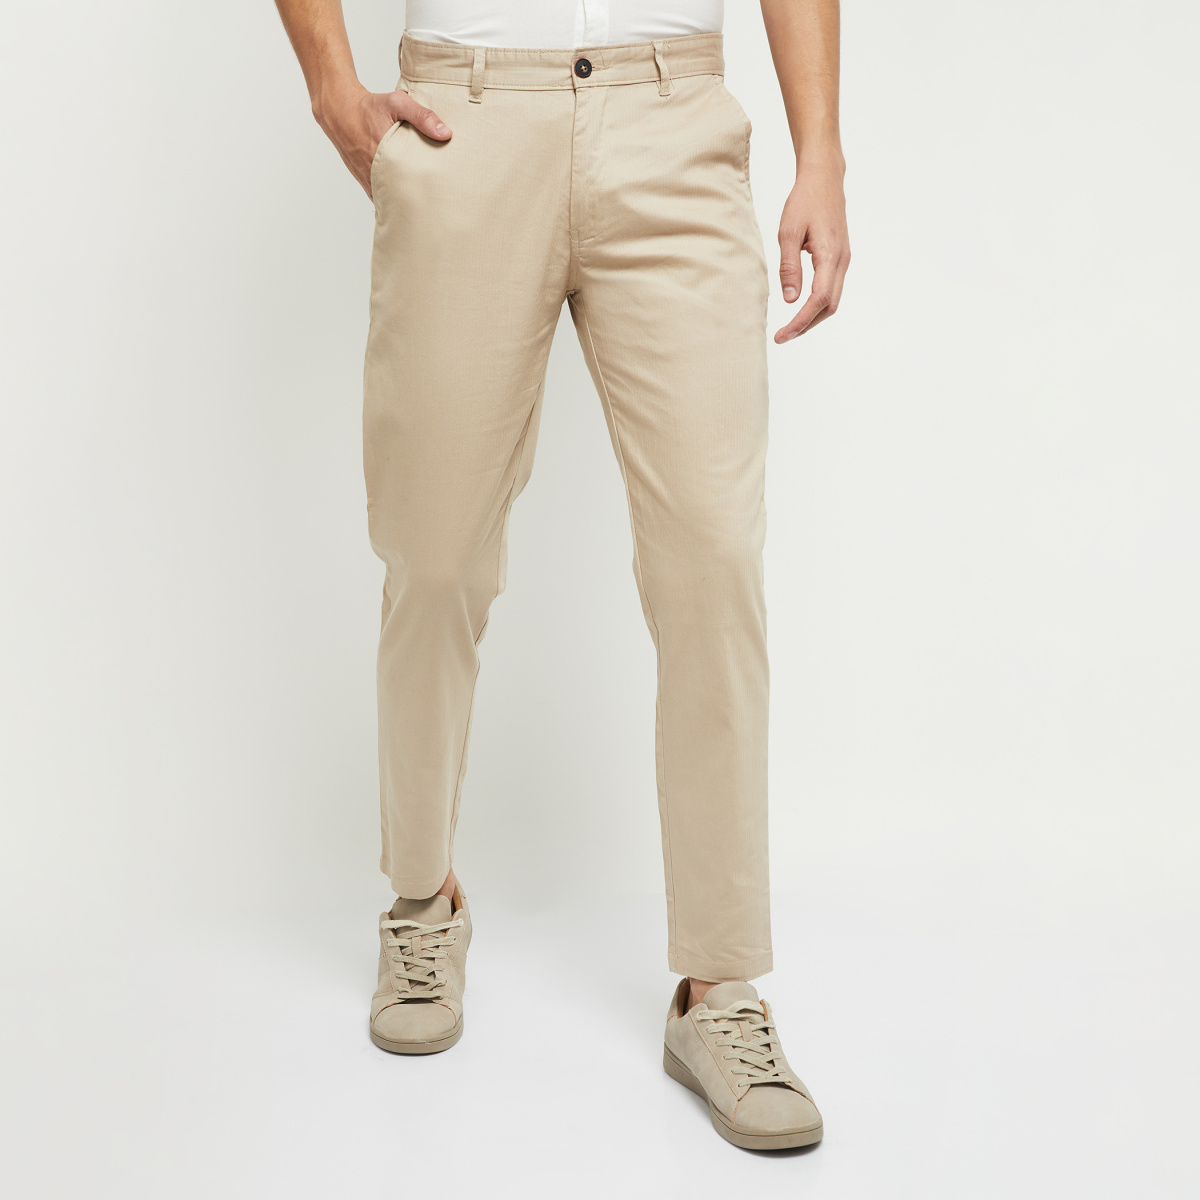 Peter England Casual Trousers  Buy Peter England Men Olive Textured Super Slim  Fit Casual Trousers Online  Nykaa Fashion